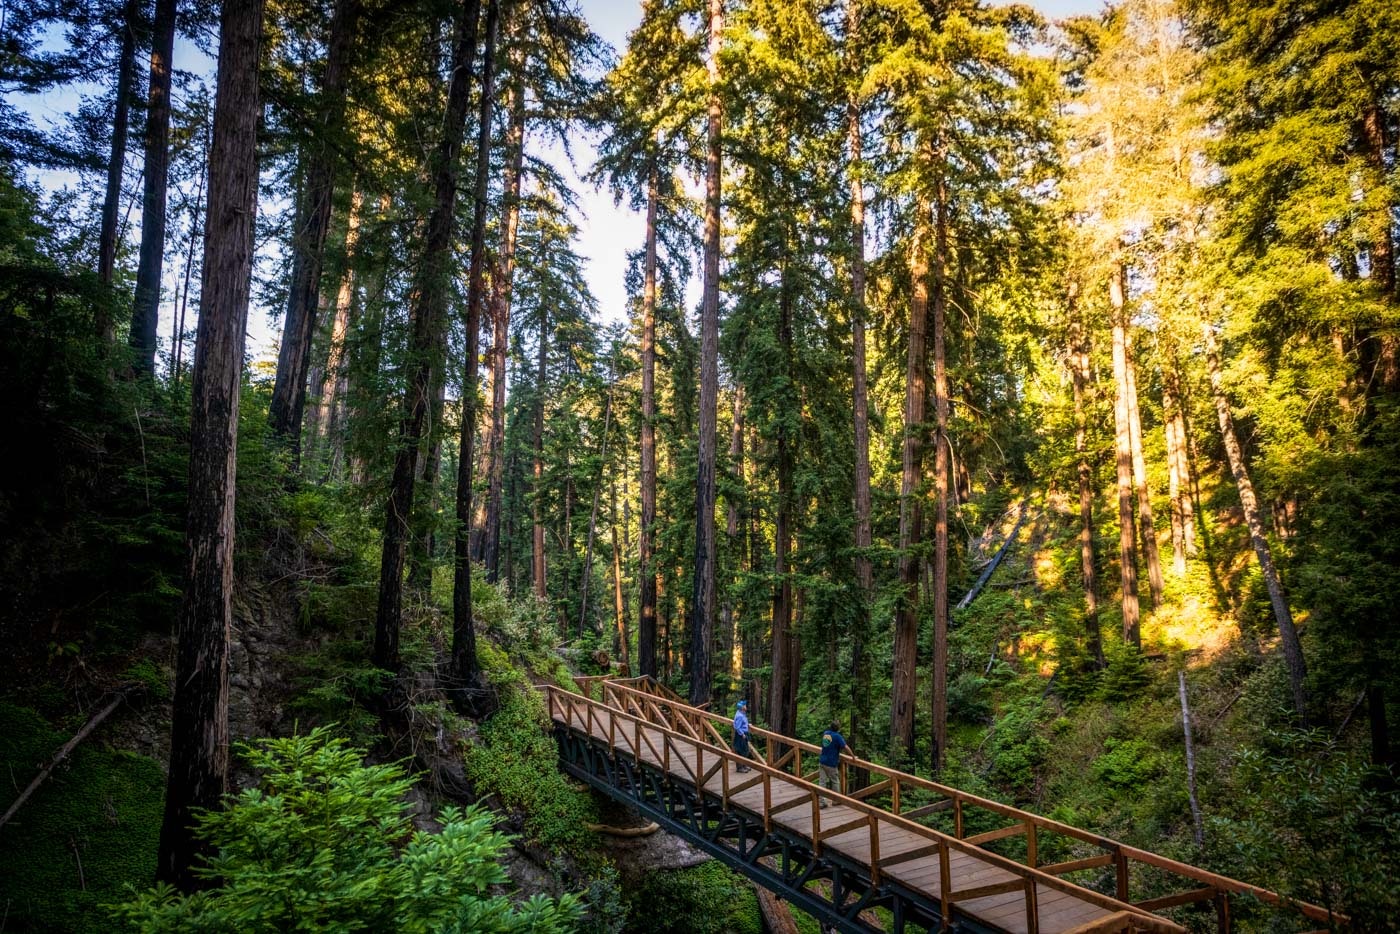 The Pfeiffer Falls Trail in California's Pfeiffer Big Sur State Park on June 1, 2021. Save the Redwoods League and California State Parks installed a 70-foot pedestrian bridge that spans the Pfeiffer Redwood Creek ravine. 